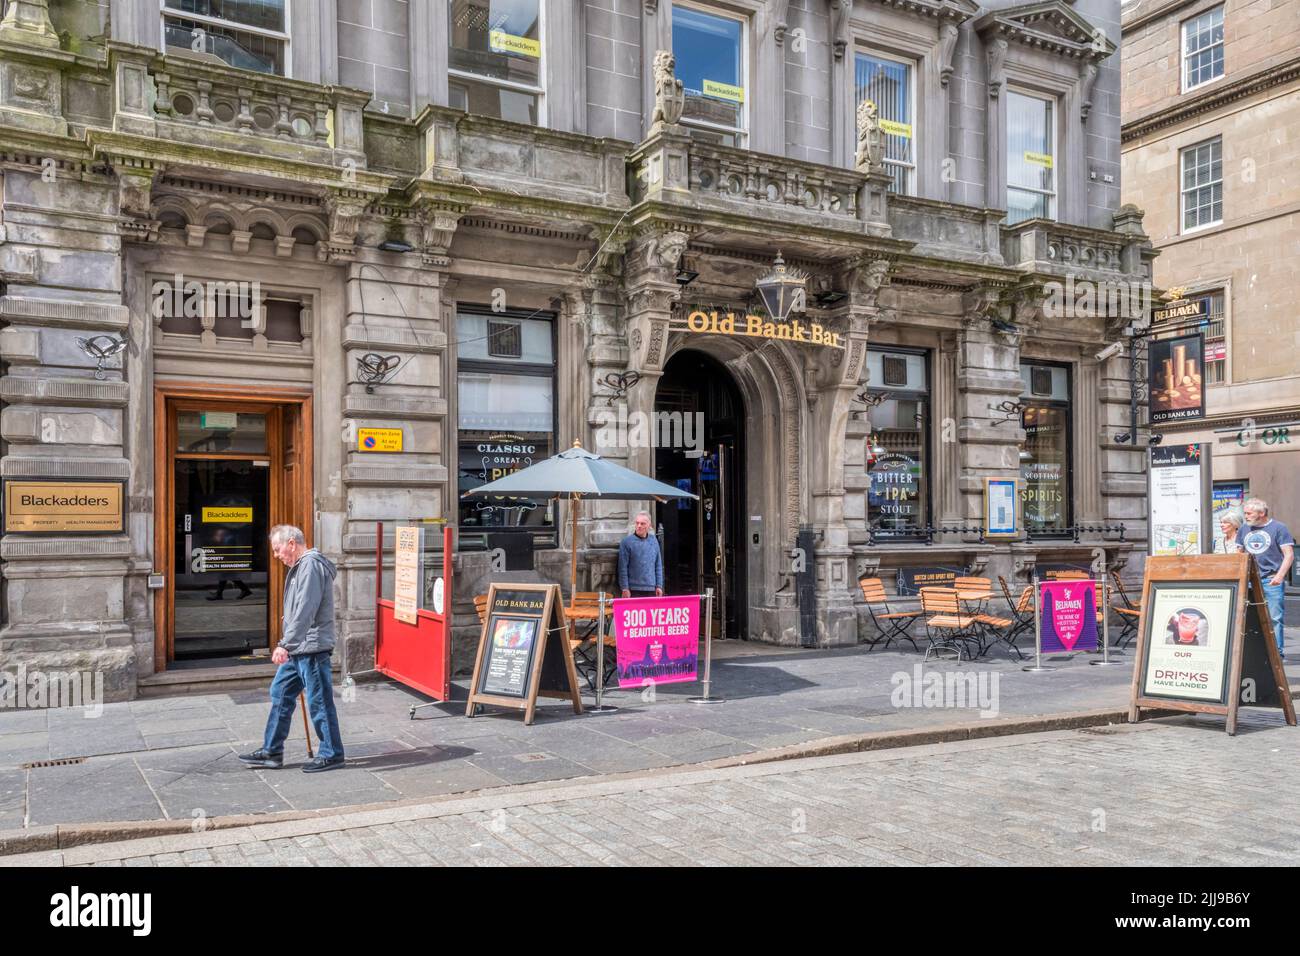 The Old Bank Bar in der Reform Street, Dundee. Stockfoto